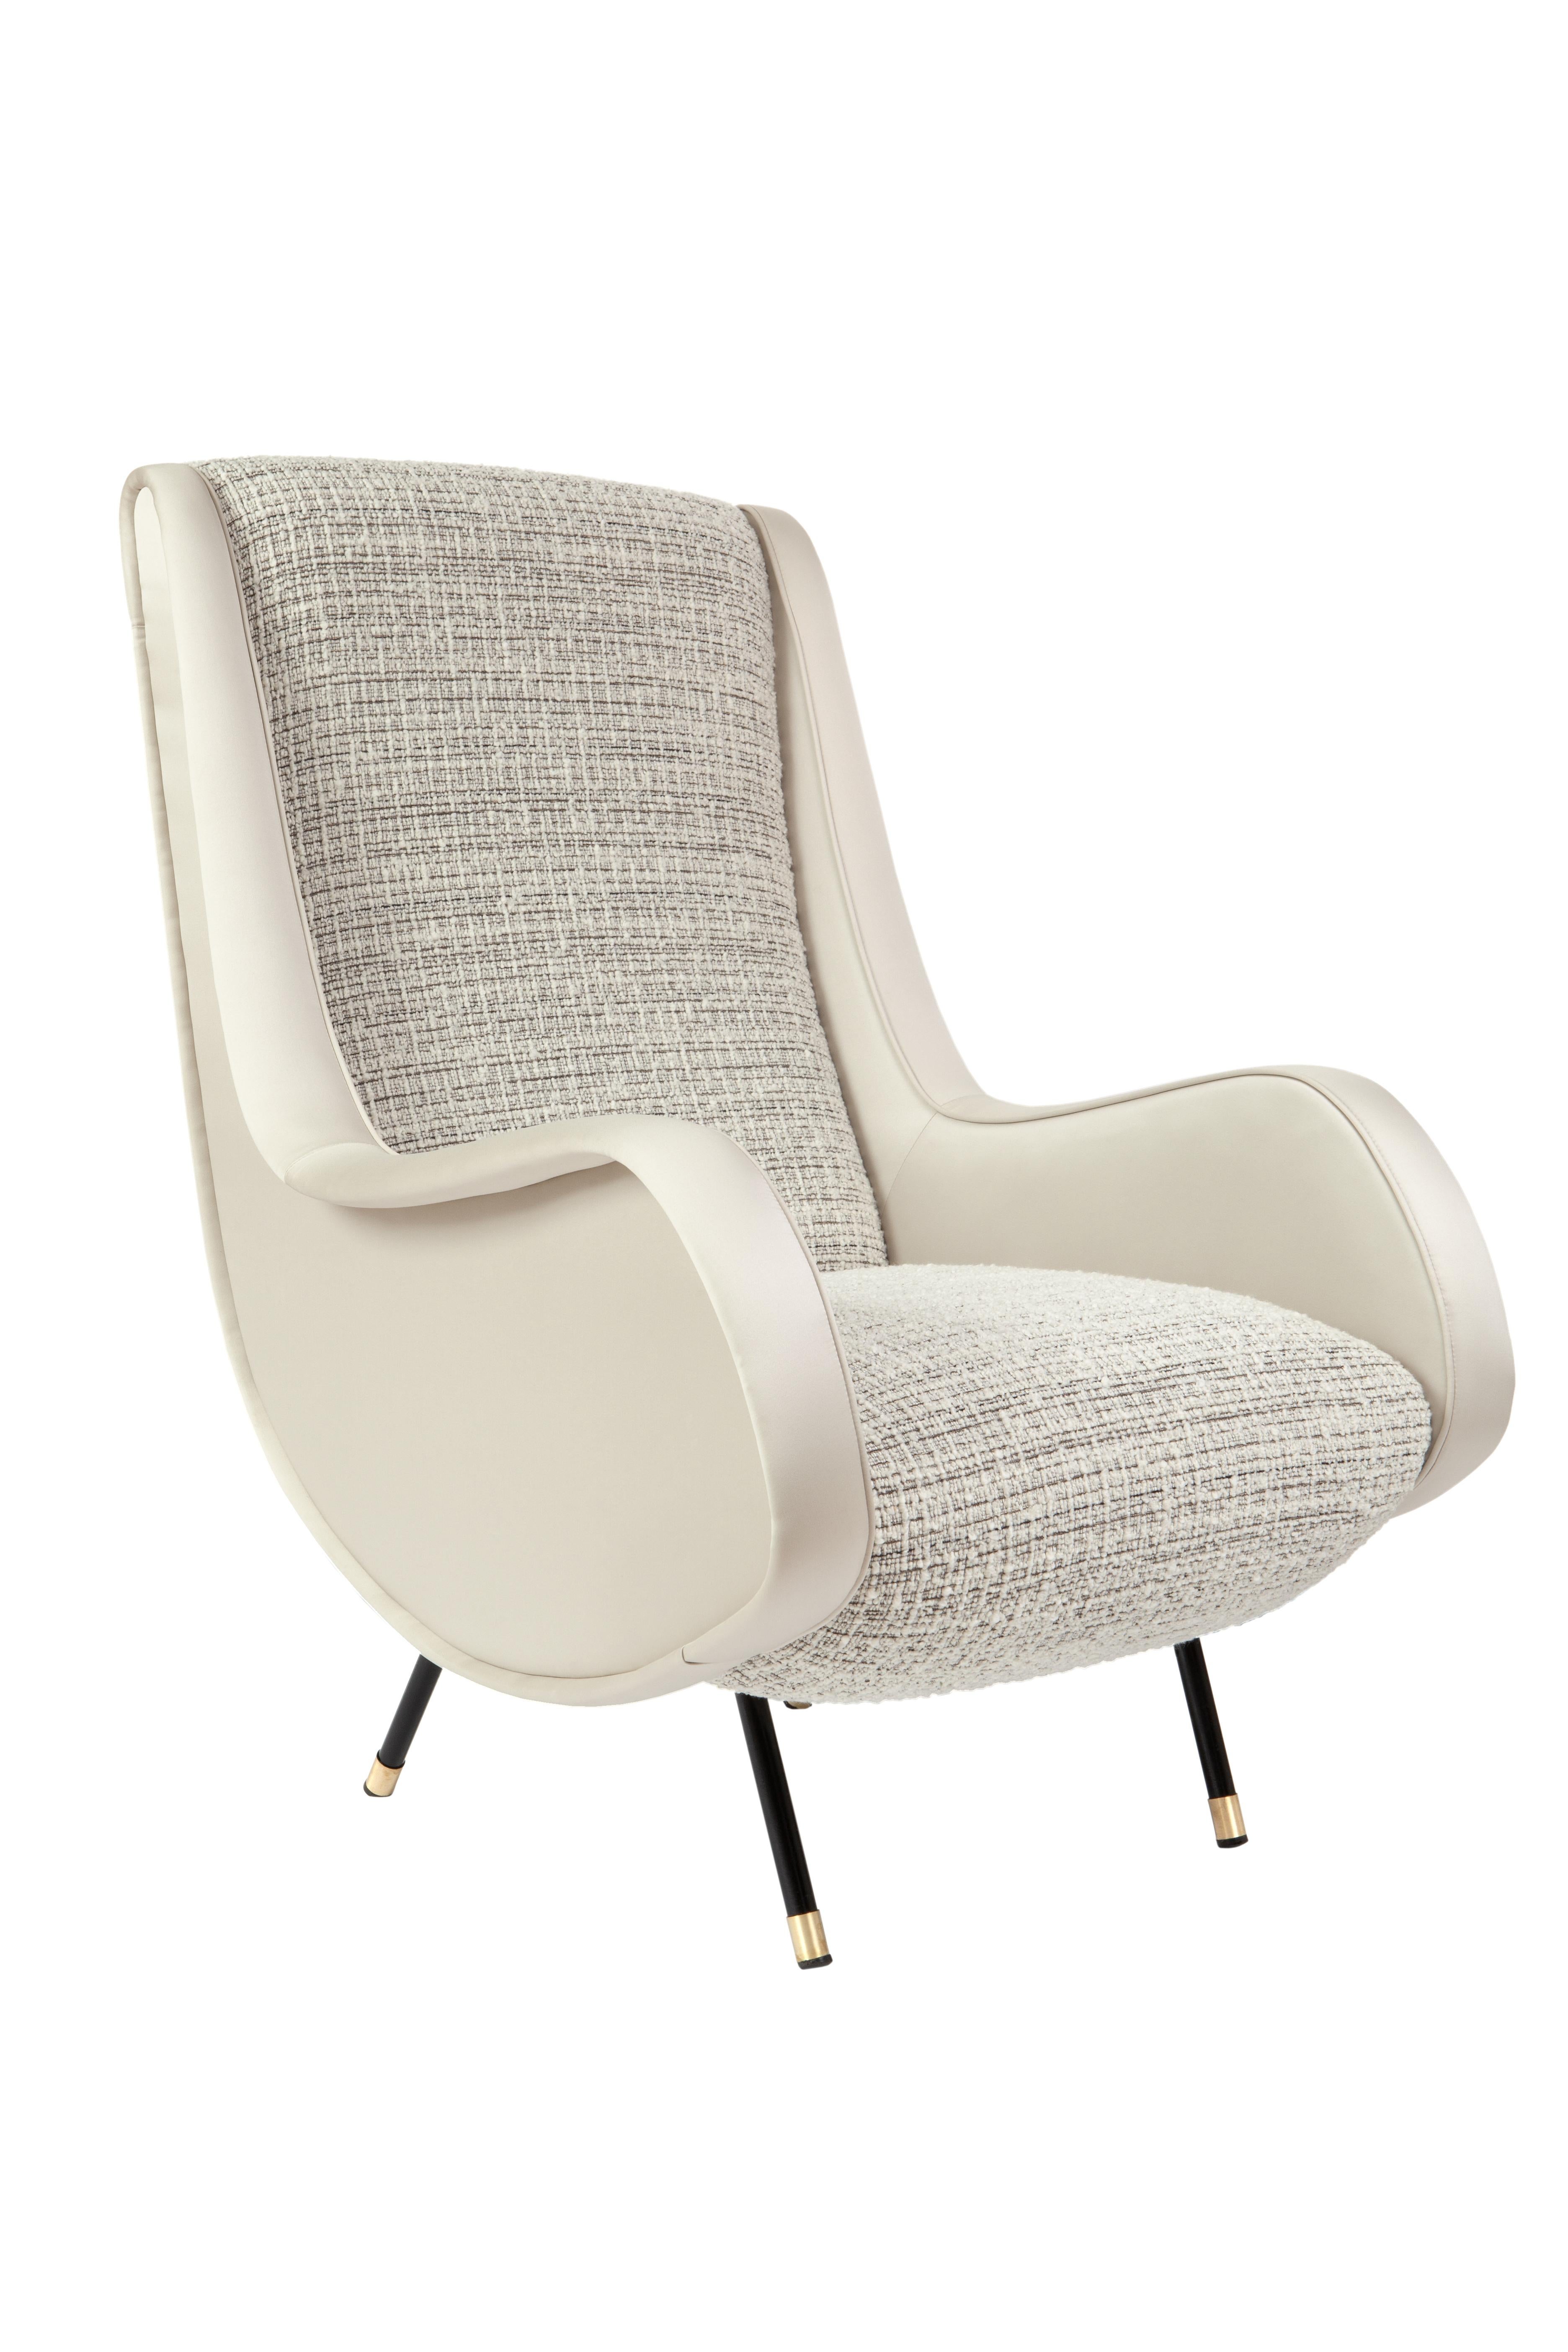 Pair of chairs form the 1960s with newly upholstered arms in cotton satin by Dedar with body upholstered in bouclé by Toyine Sellers

Seat height 38 cm.